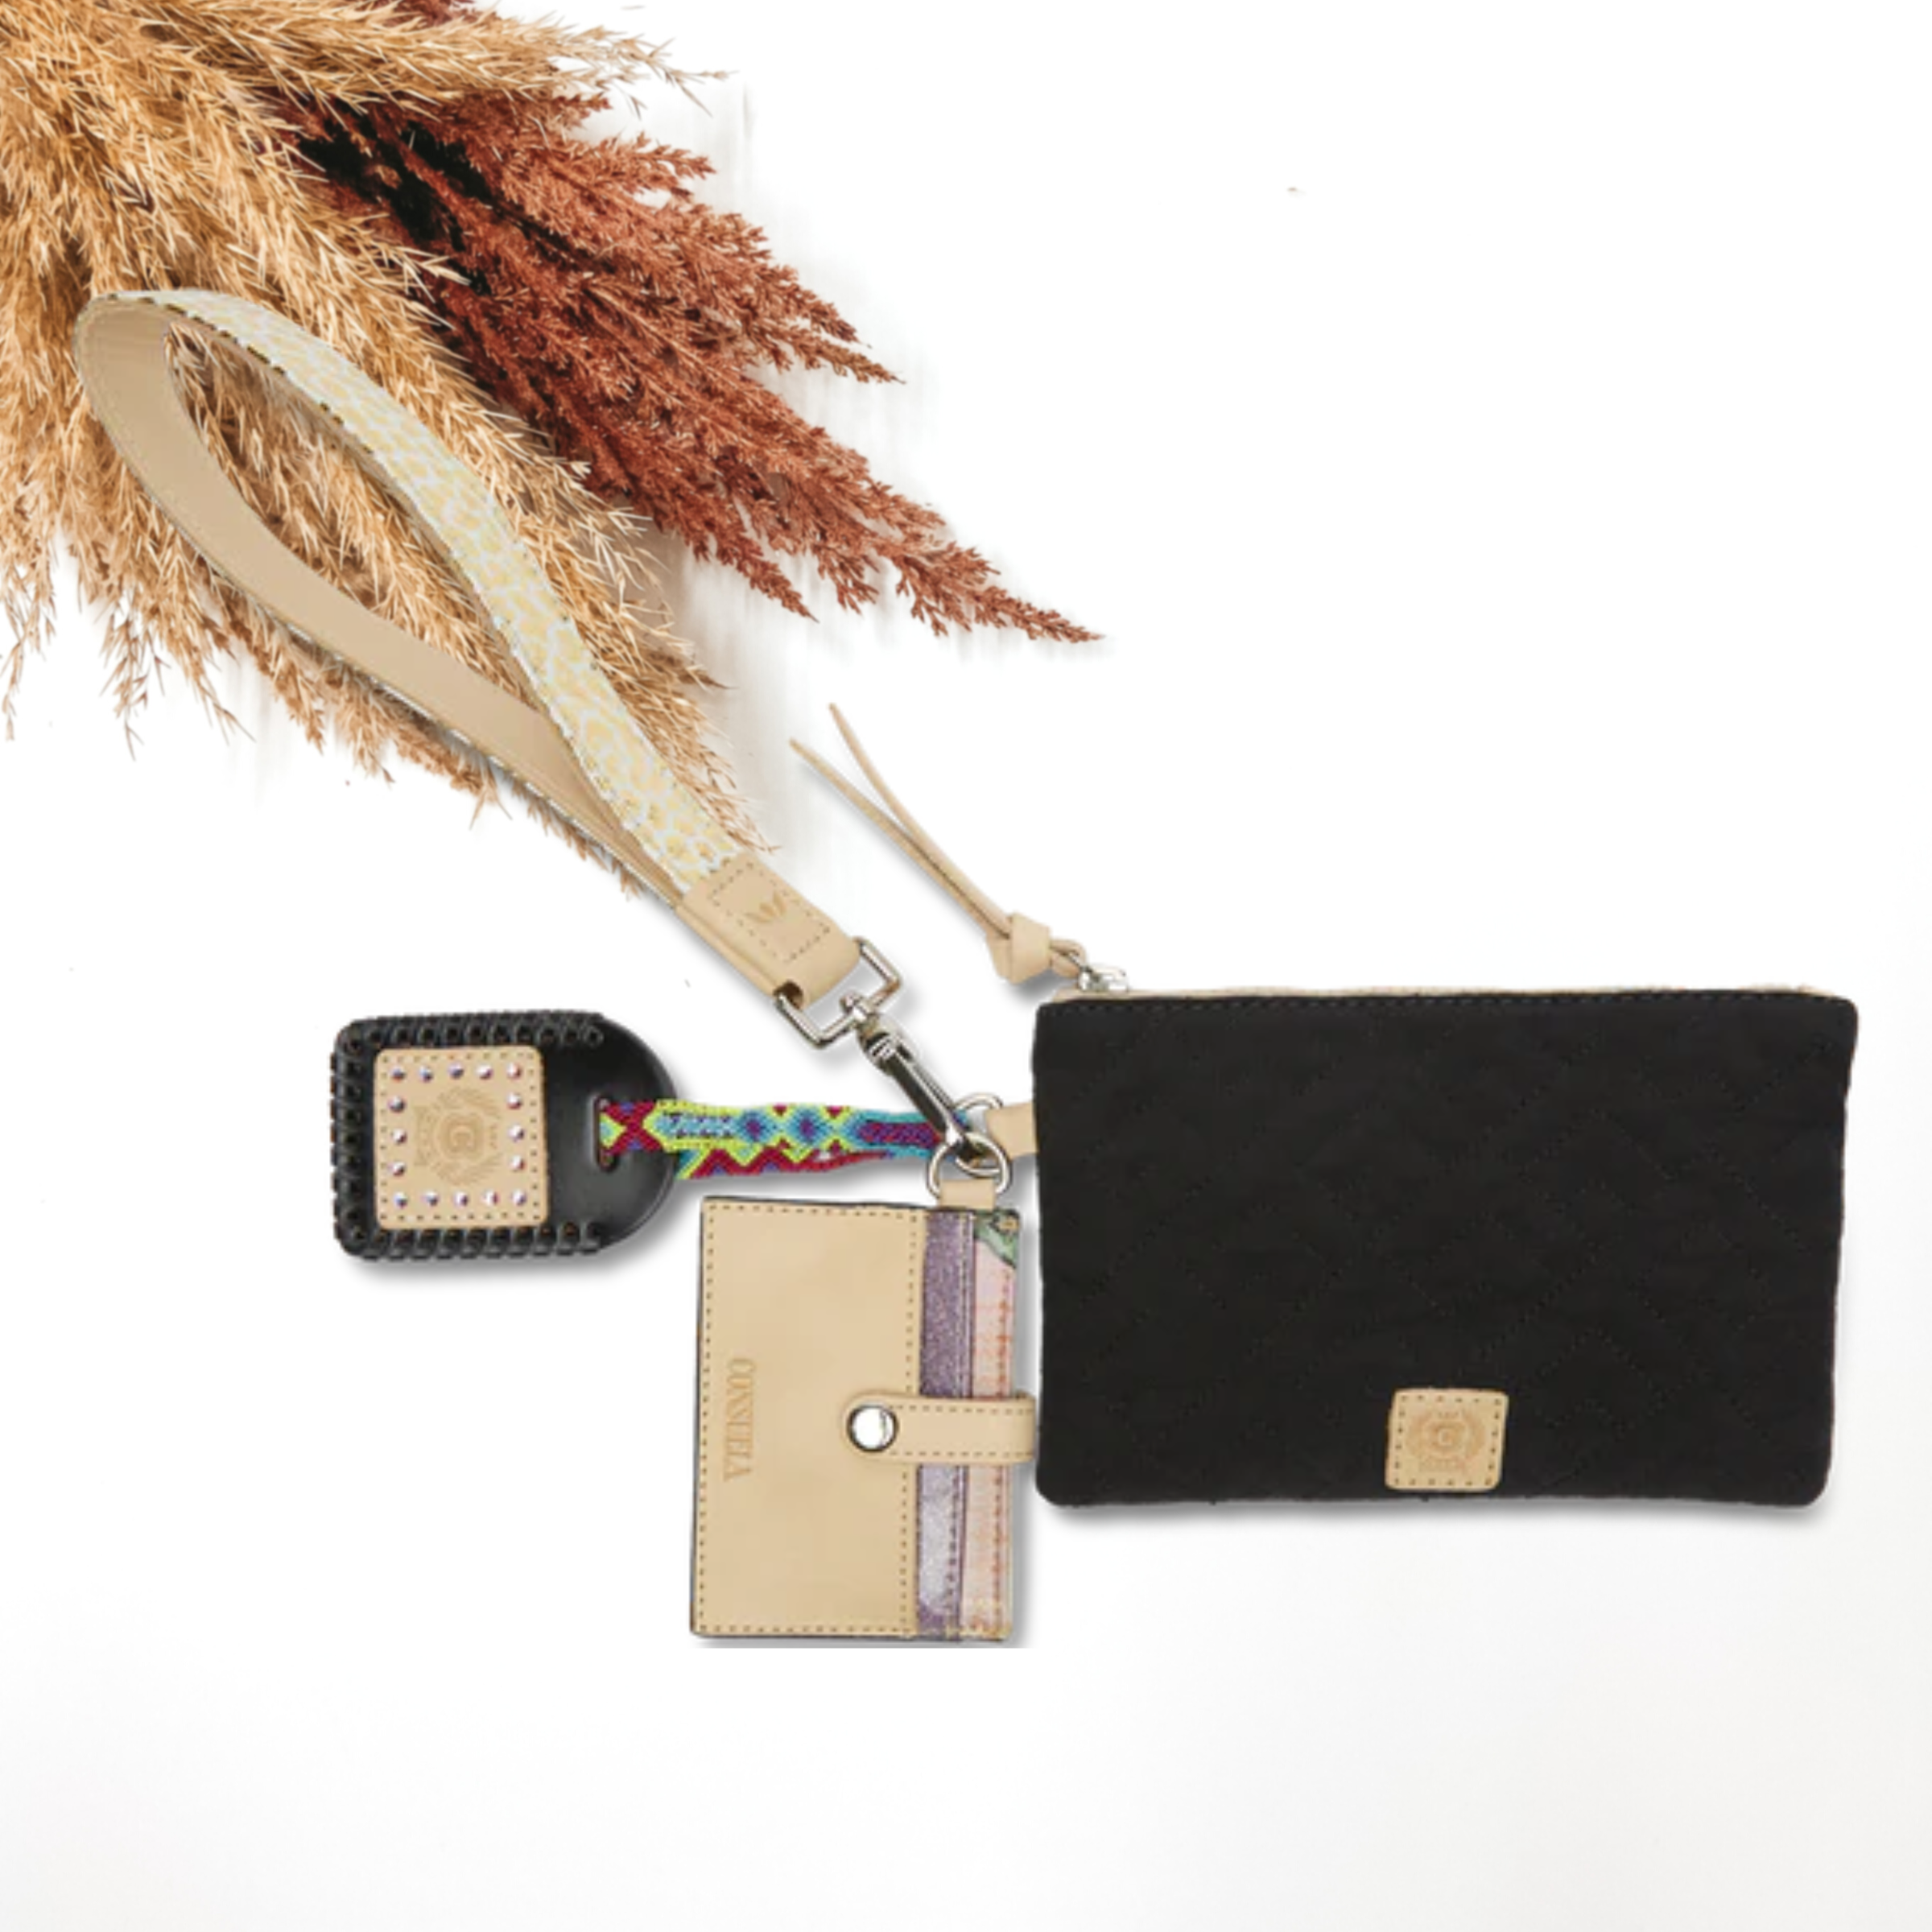 Pictured on a white background is a black pouch with a gold leopard print wristlet. This pouch also includes a a black luggage tag, light tan tassel on the zipper, and a card holder keychain.